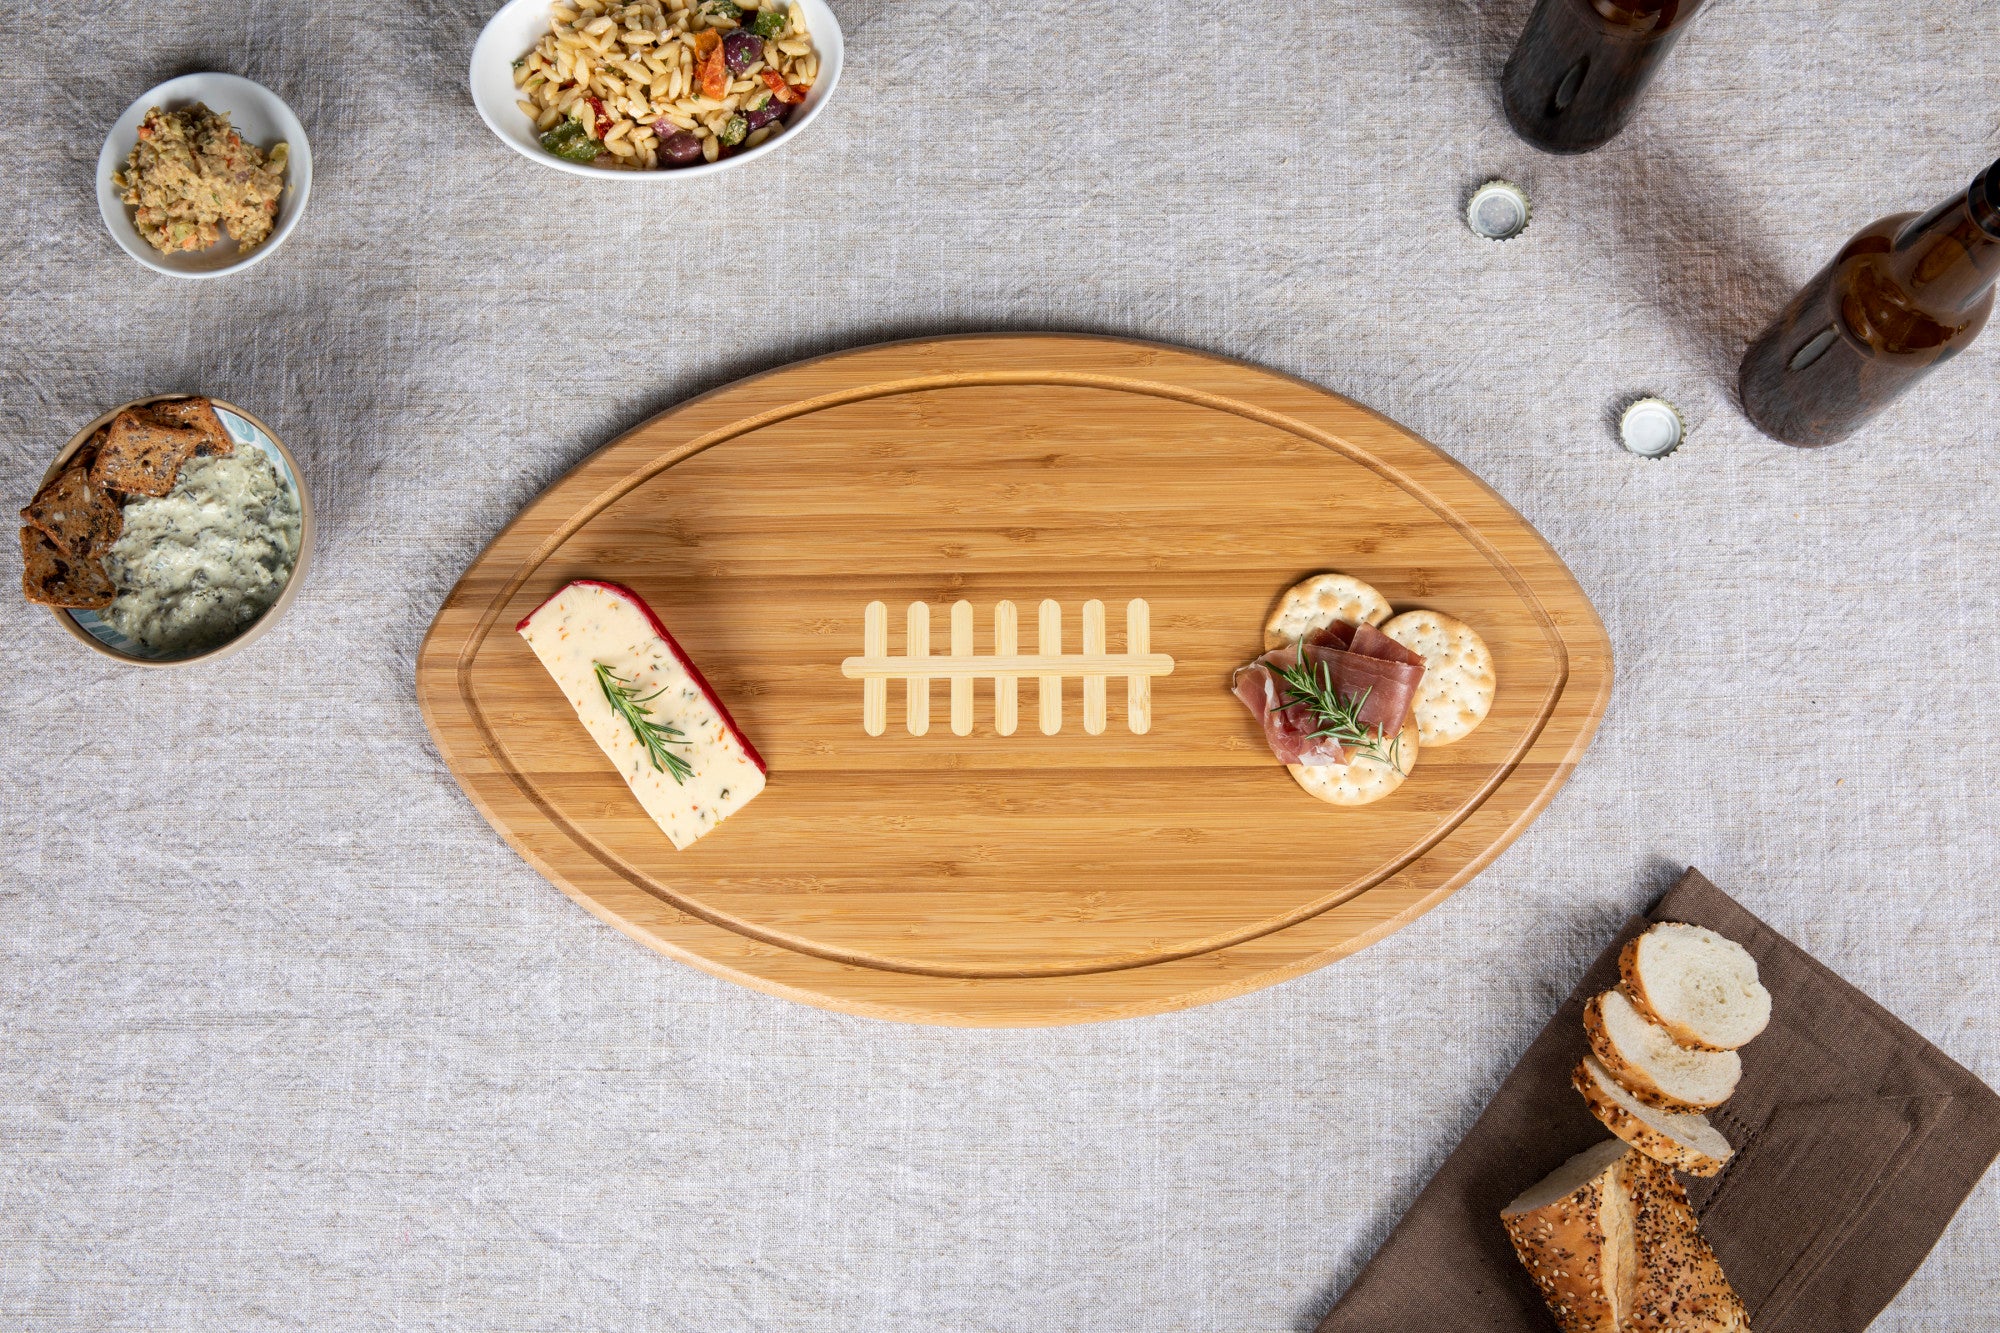 Tennessee Titans - Kickoff Football Cutting Board & Serving Tray